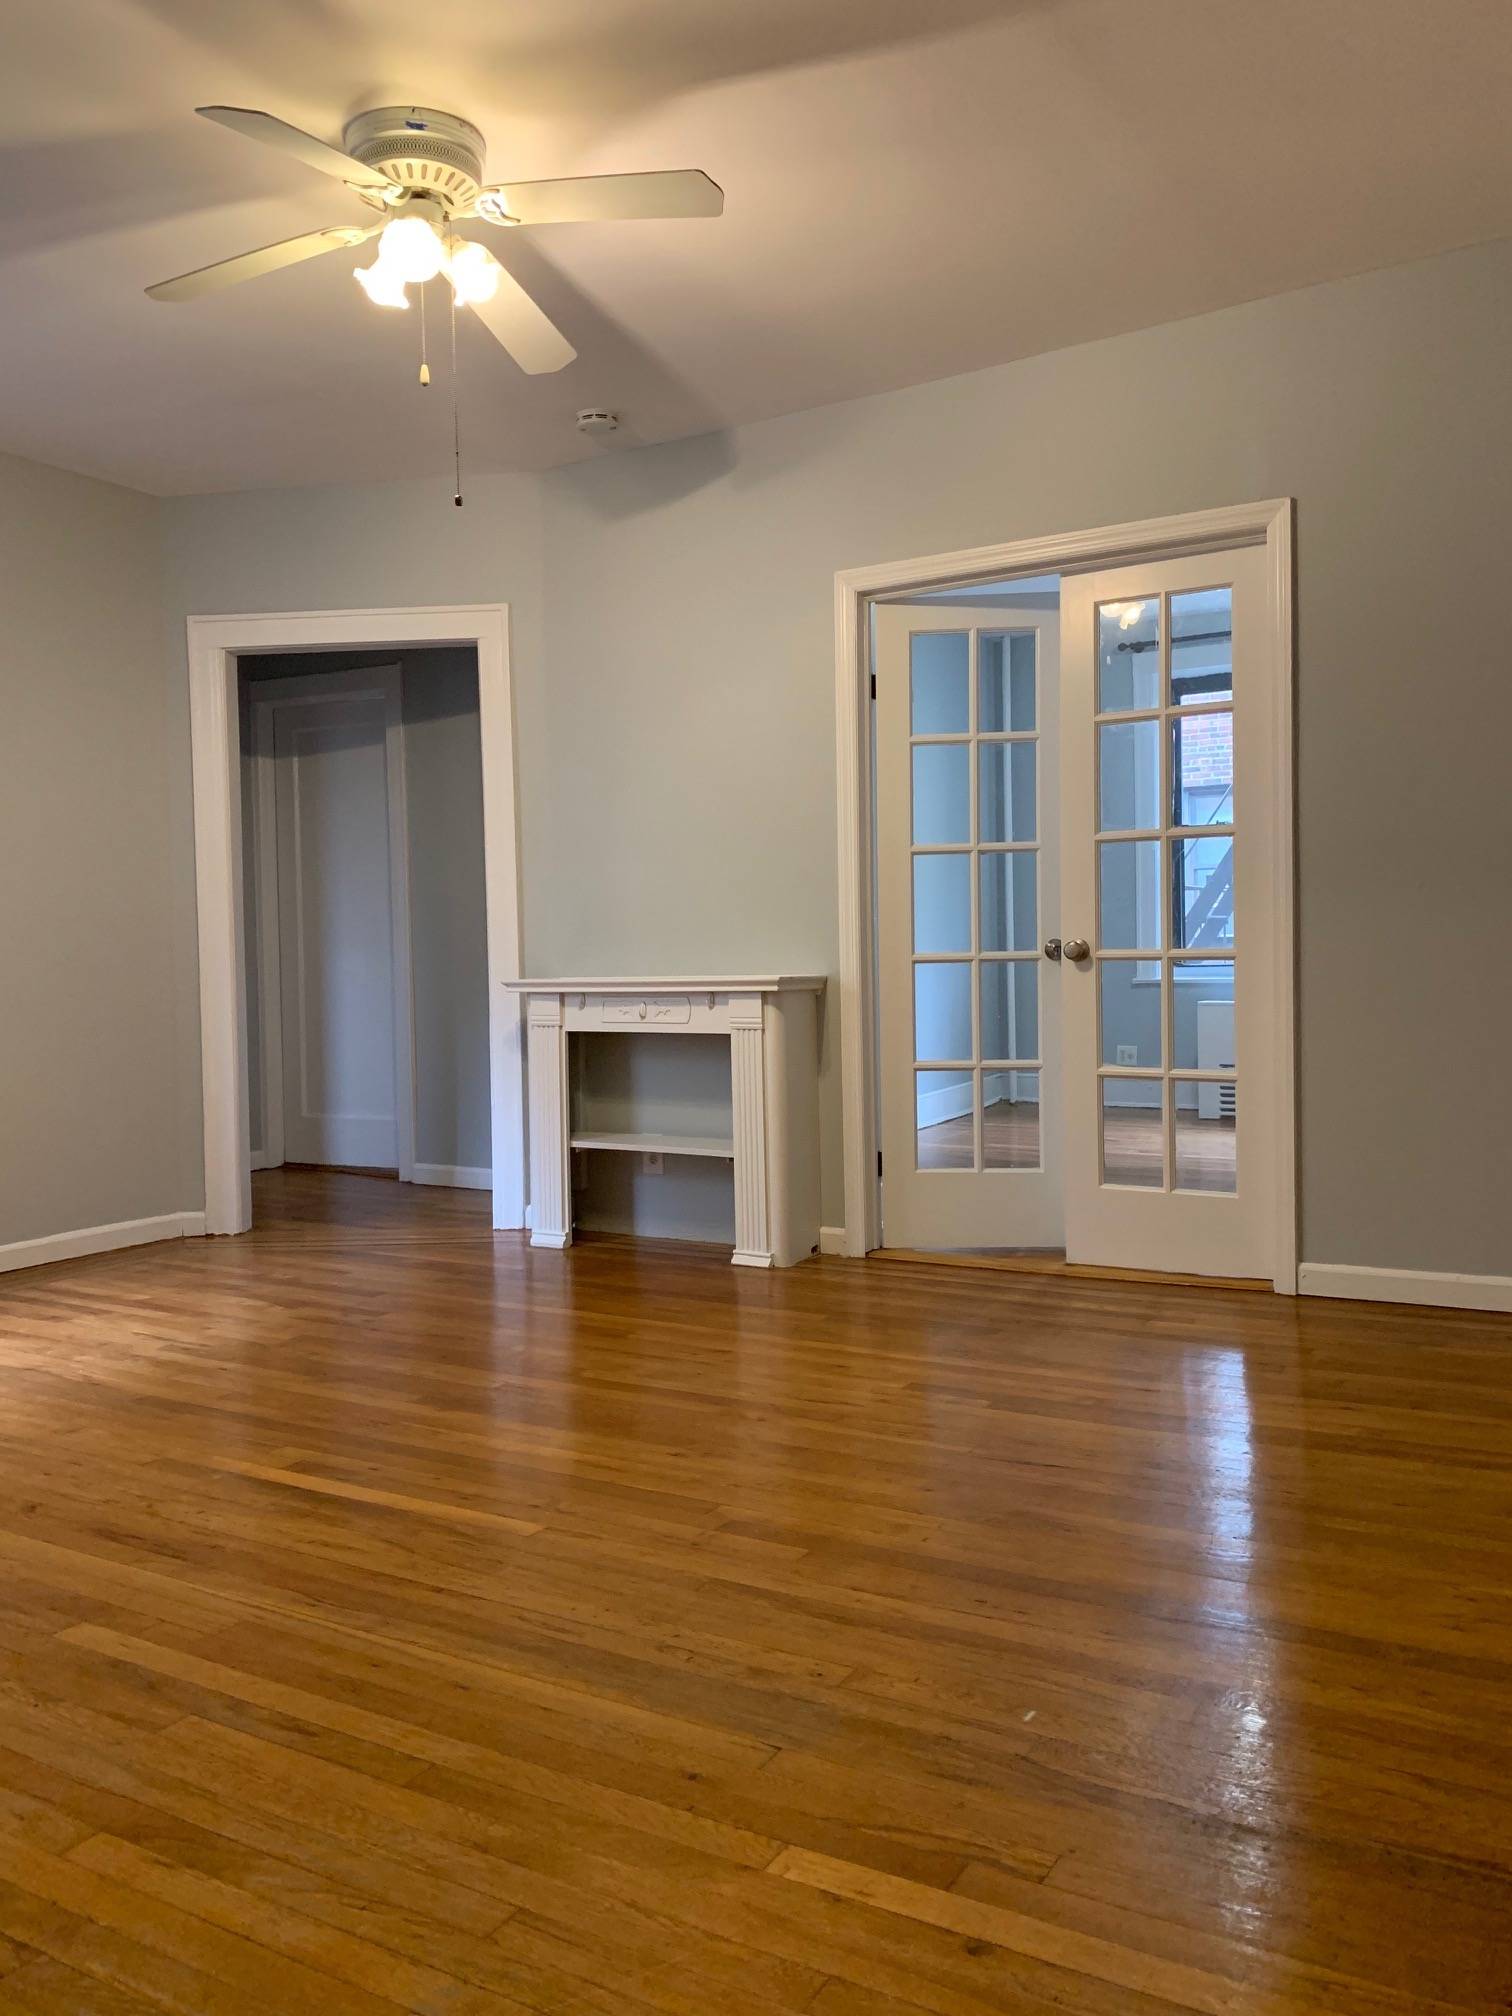 SPACIOUS 2/BD IN THE HEART OF SUNNYSIDE